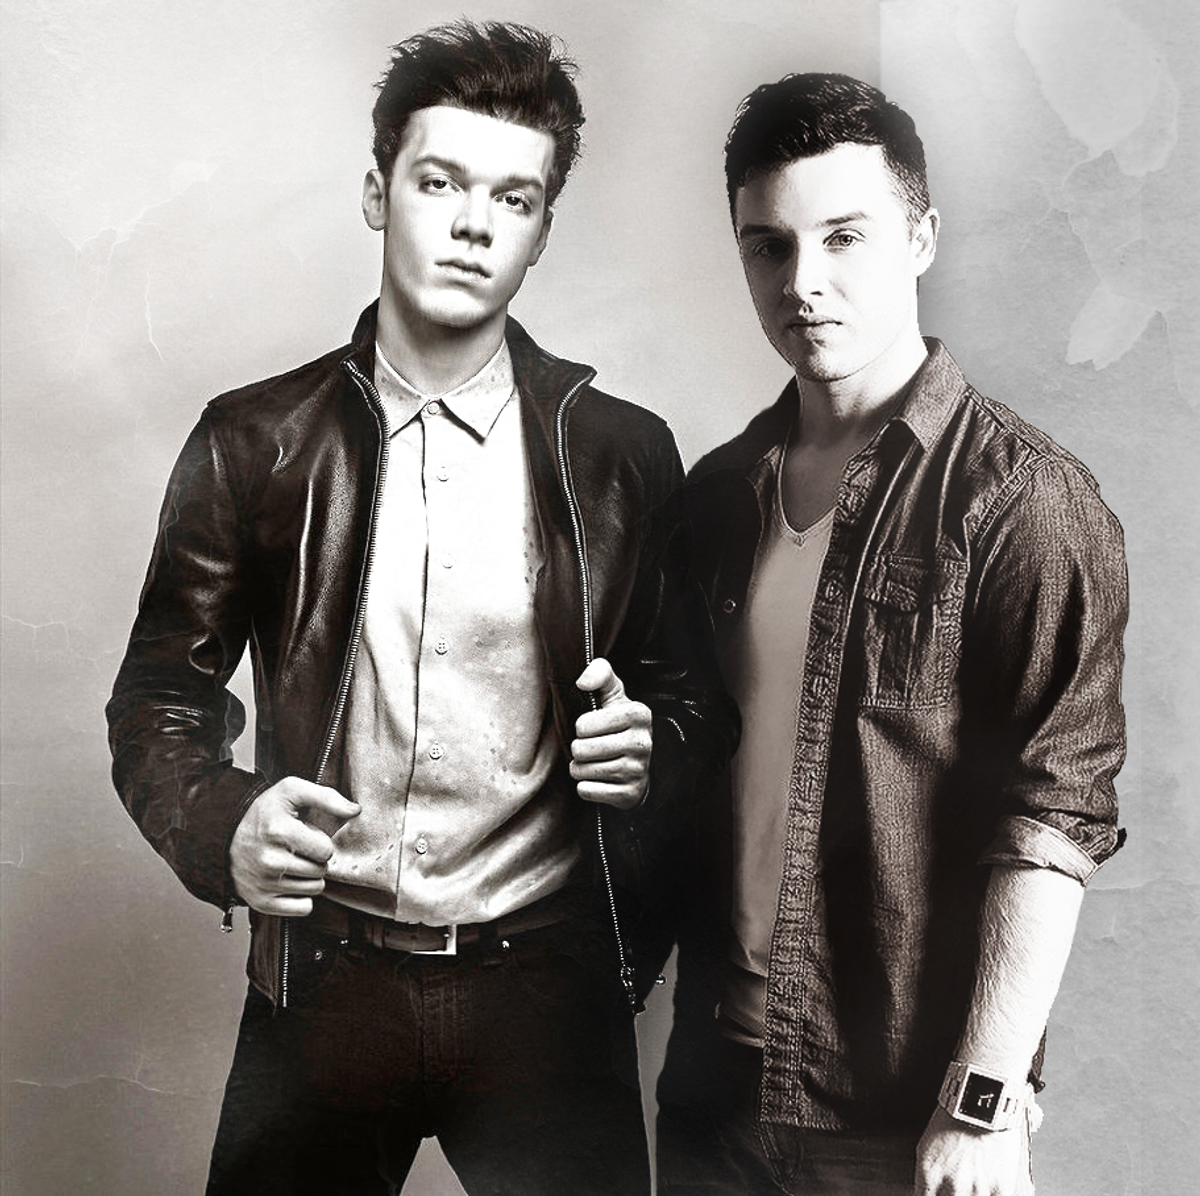 21 Times I Fell In Love With "Gallavich" On Shameless